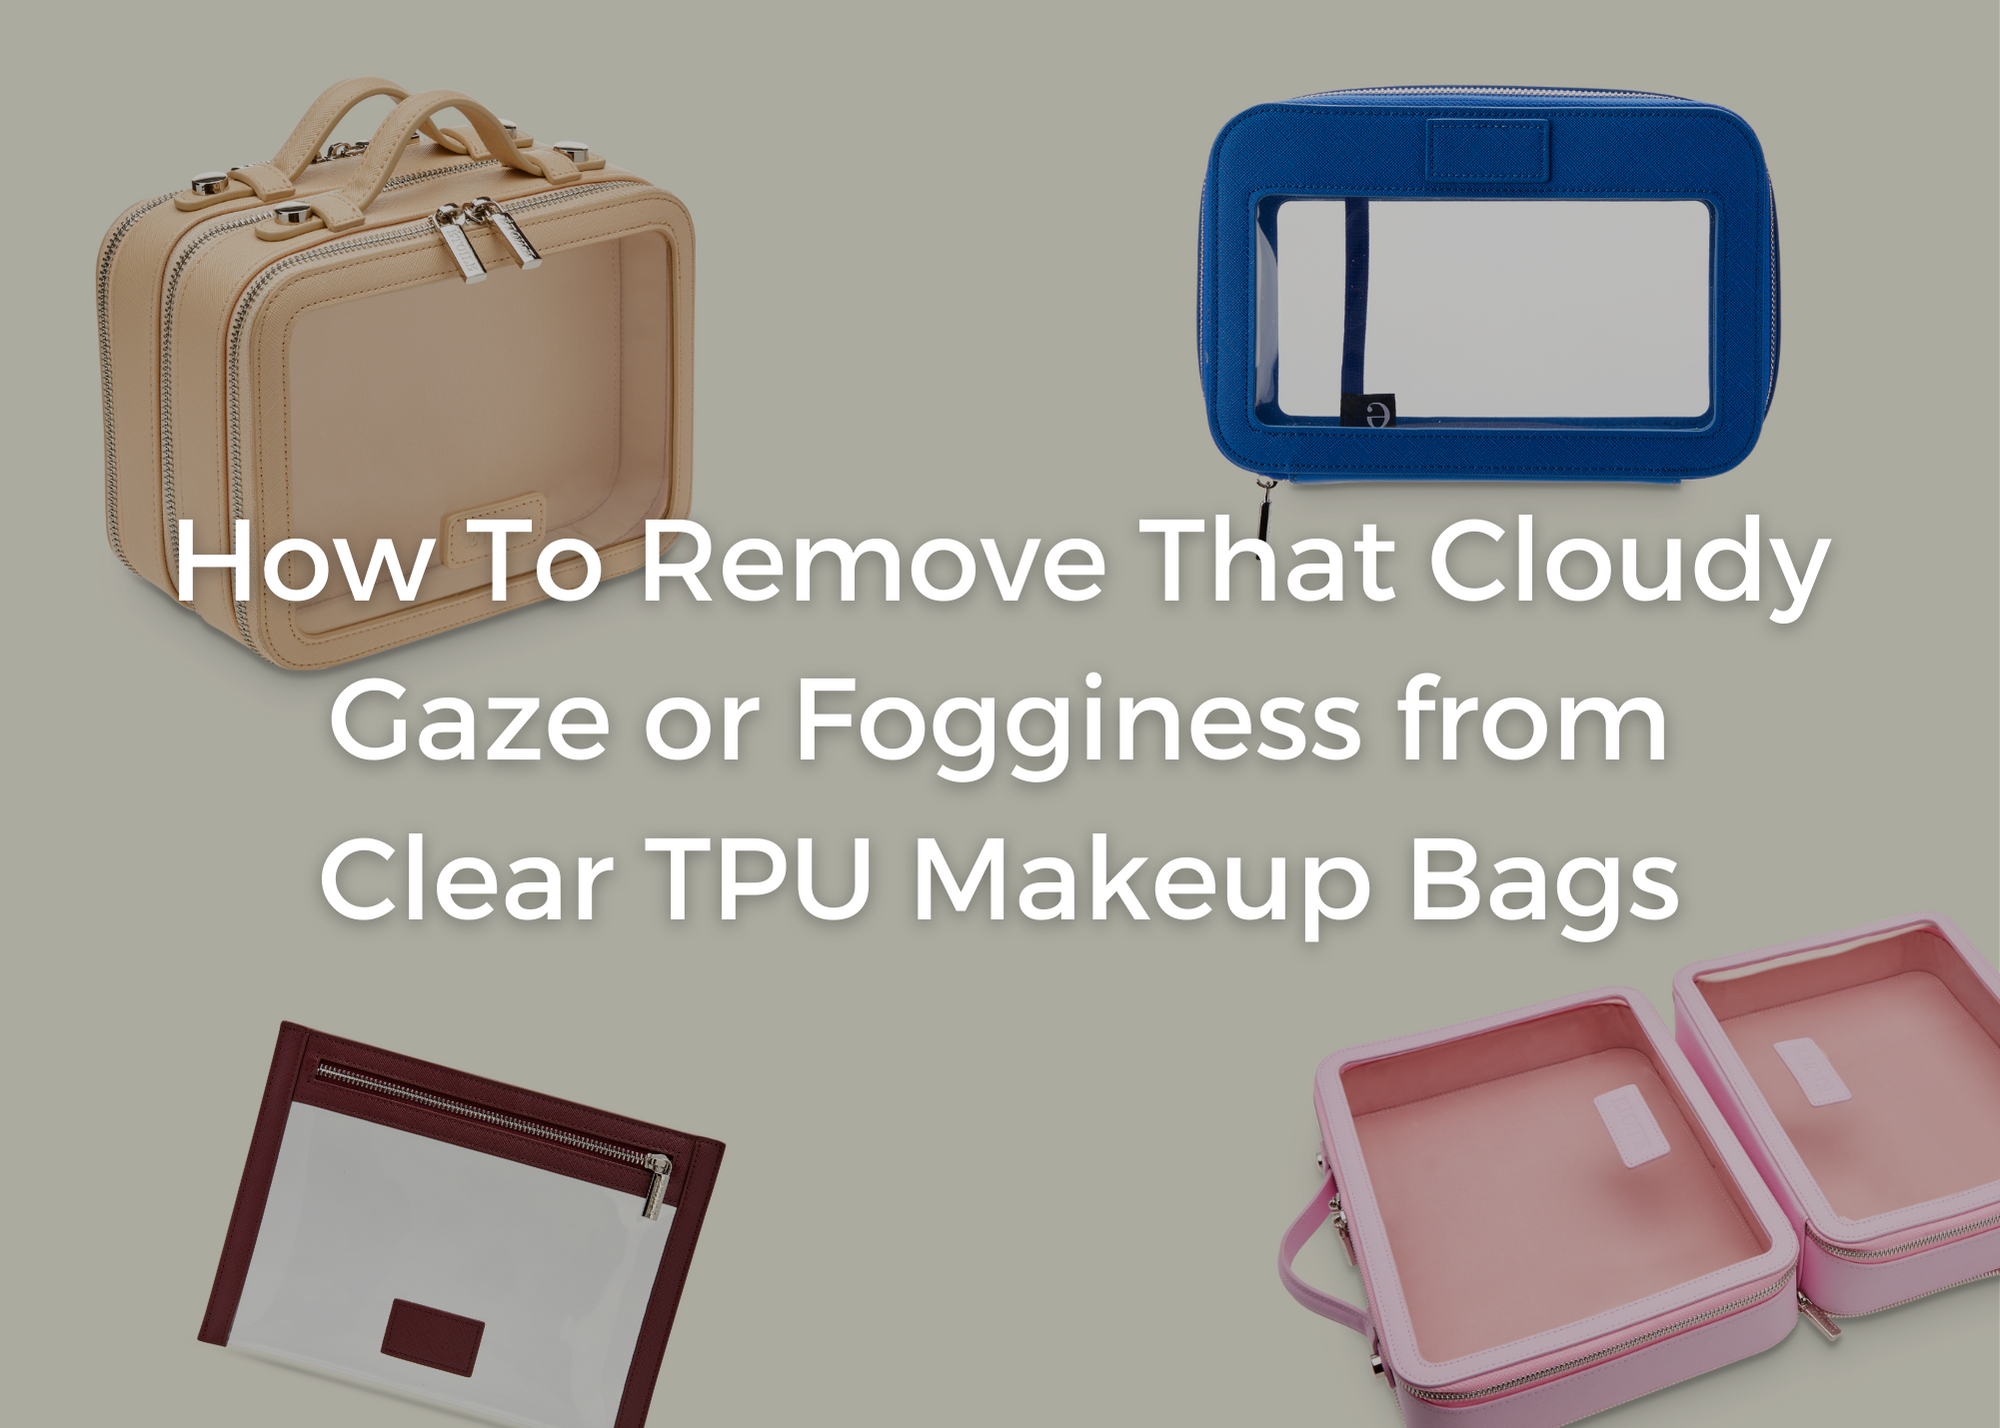 How To Remove That Cloudy Gaze or Fogginess from Clear TPU Makeup Bags